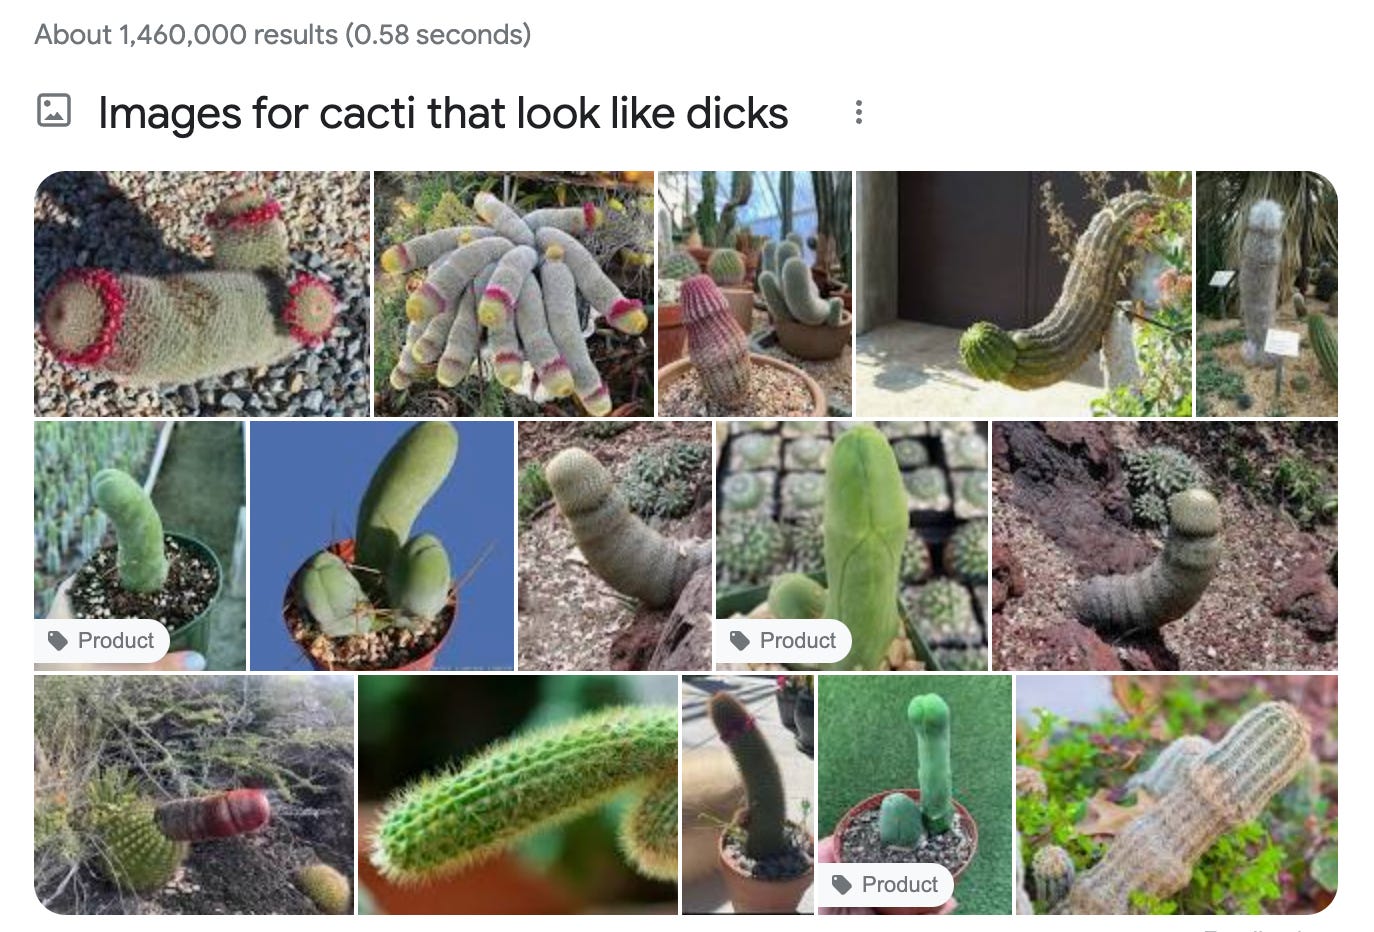 Screencap of a Google image search with text: "Images for cacti that look like dicks" with 12 images of cacti that look like dicks.